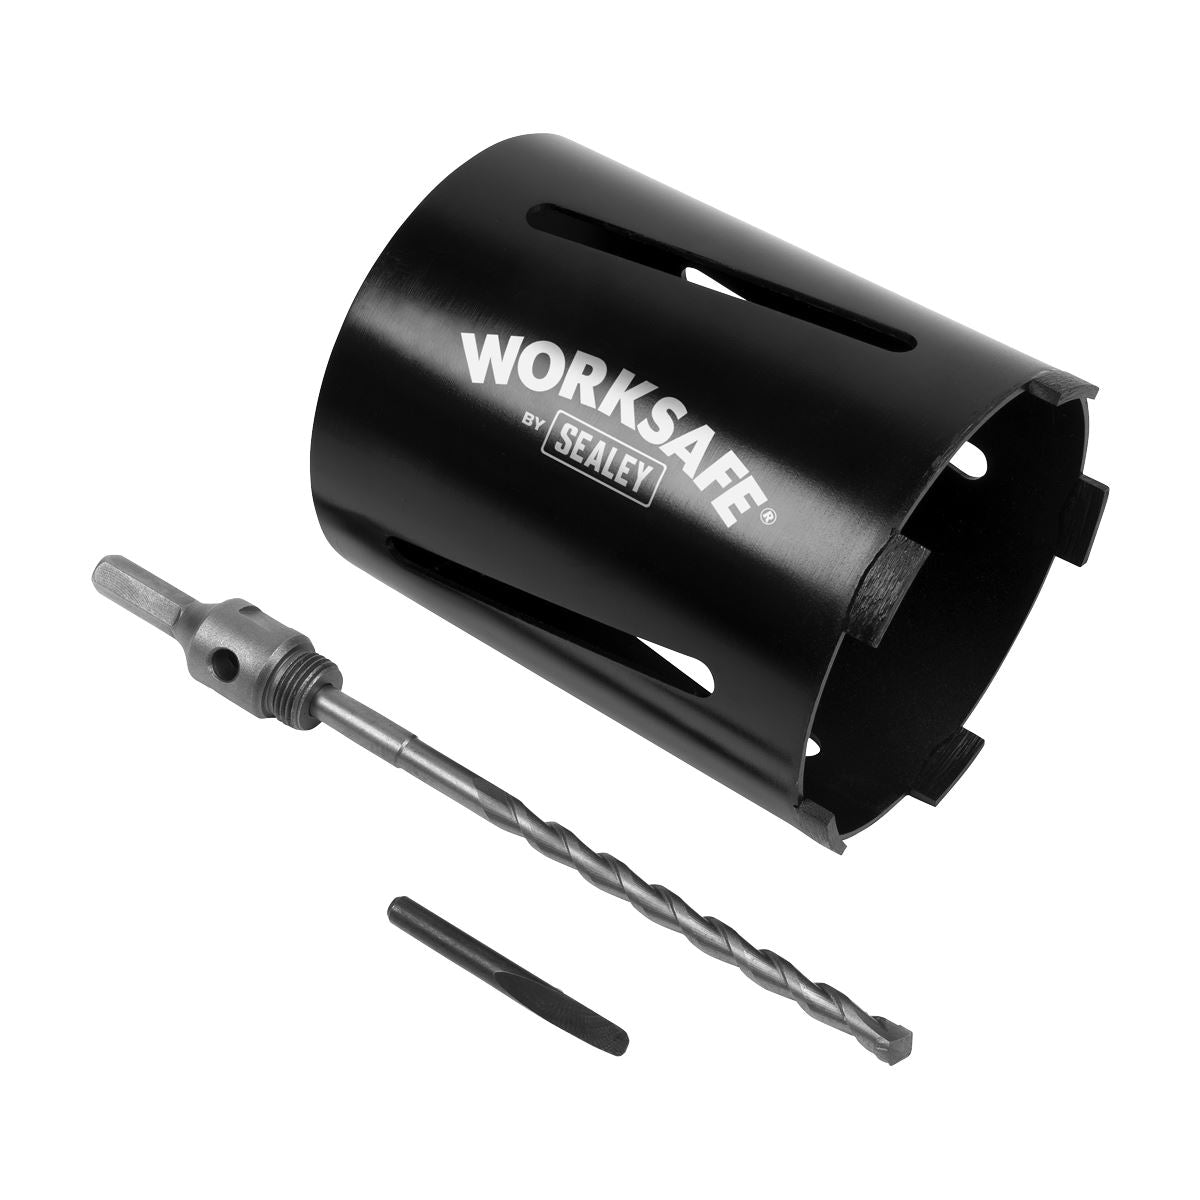 Worksafe by Sealey Core-to-Go Dry Diamond Core Drill Ø127mm x 150mm